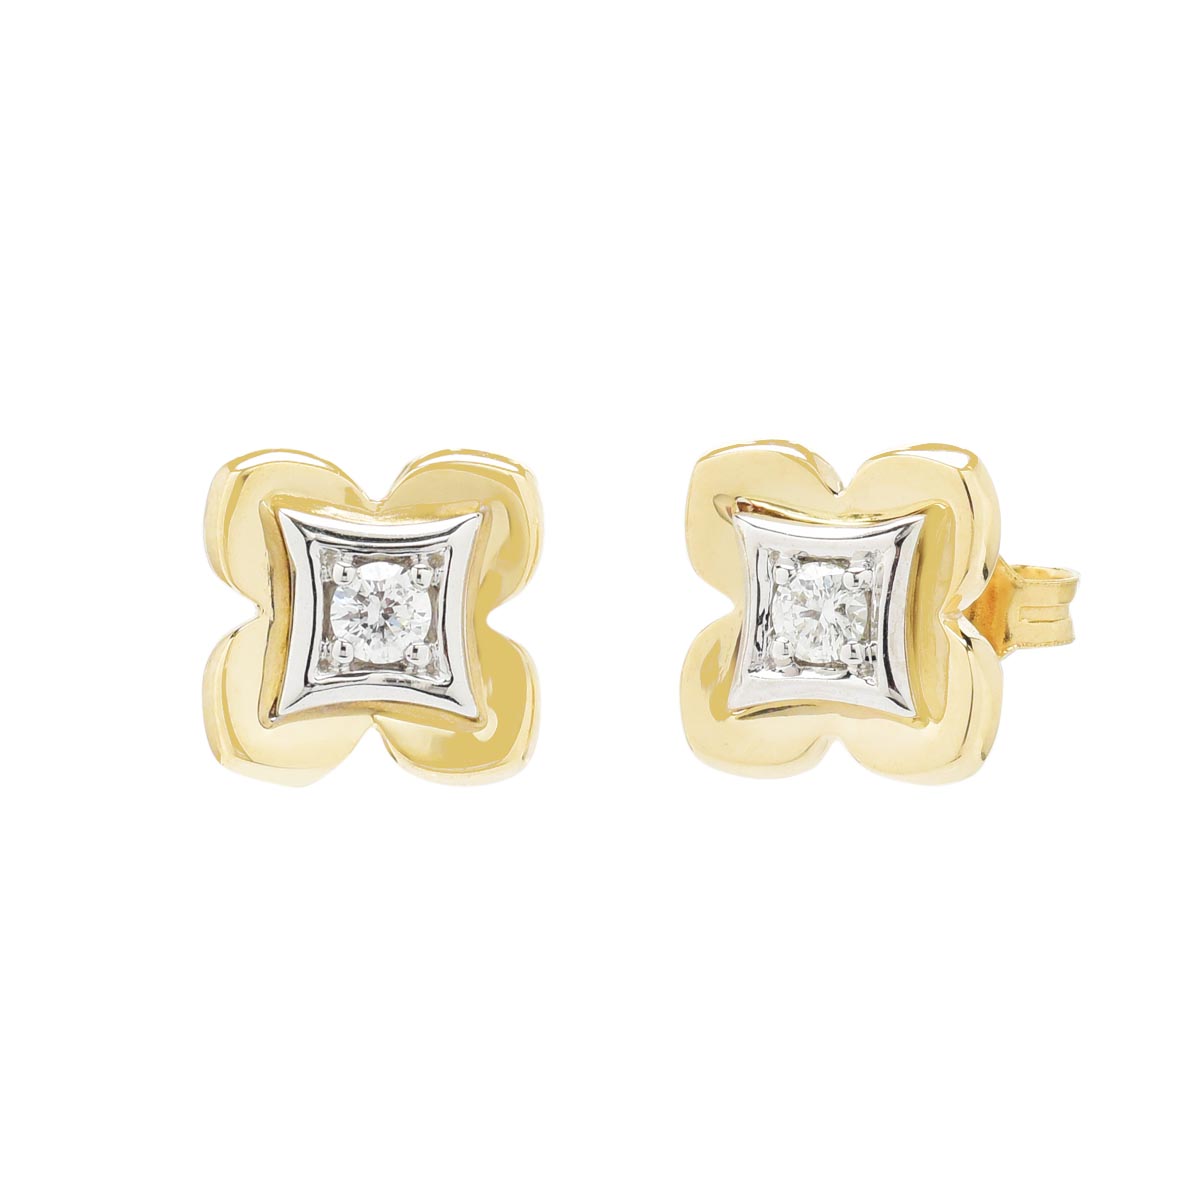 Northern Star Diamond Celestial Collection Earrings in 10kt Yellow and White Gold (1/10ct tw)